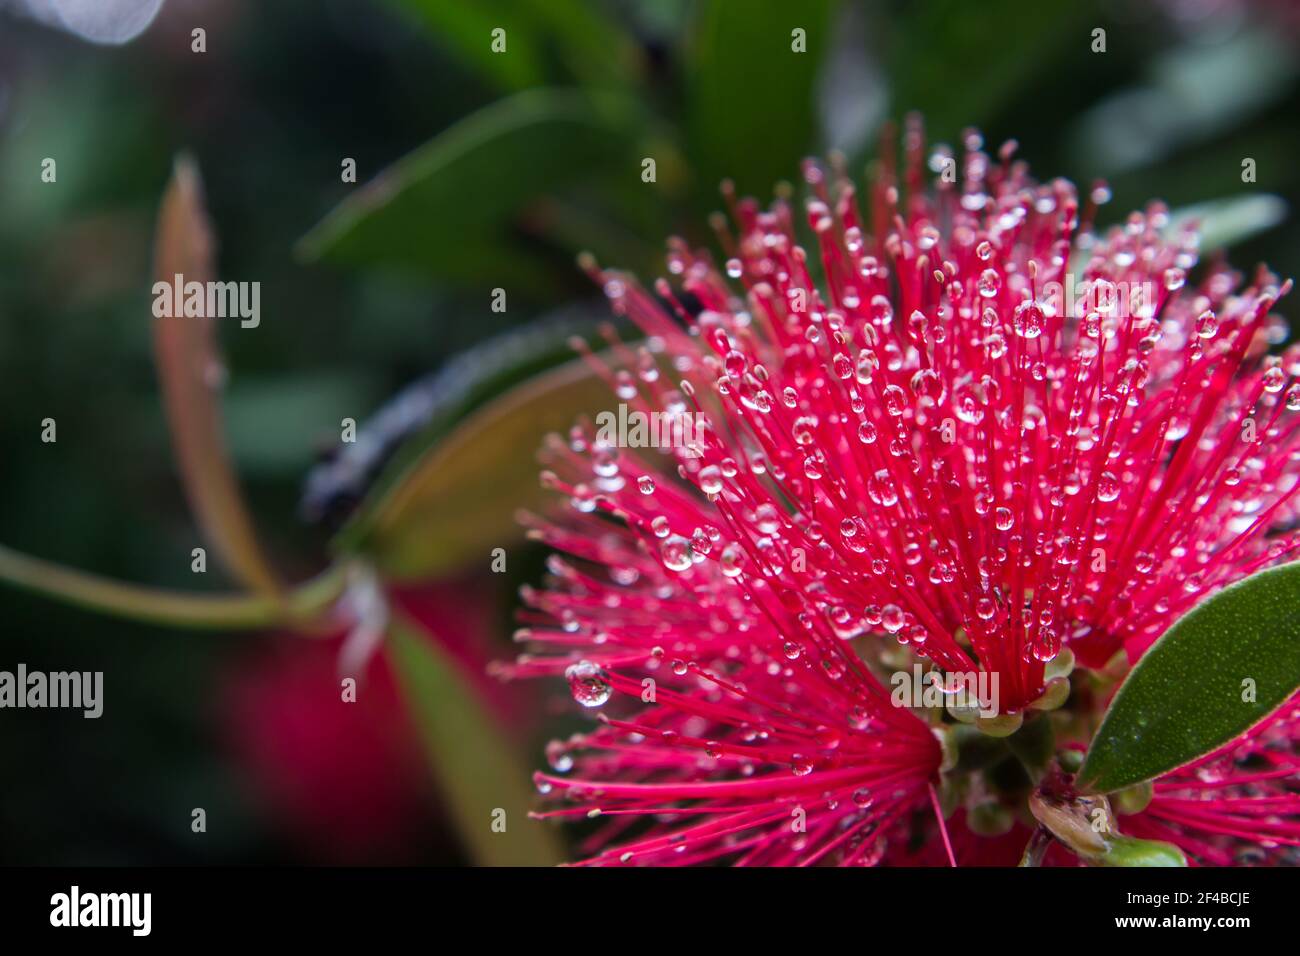 Small water droplets caught in the fine filaments of the spiky flower of a scarlet bottlebrush Stock Photo